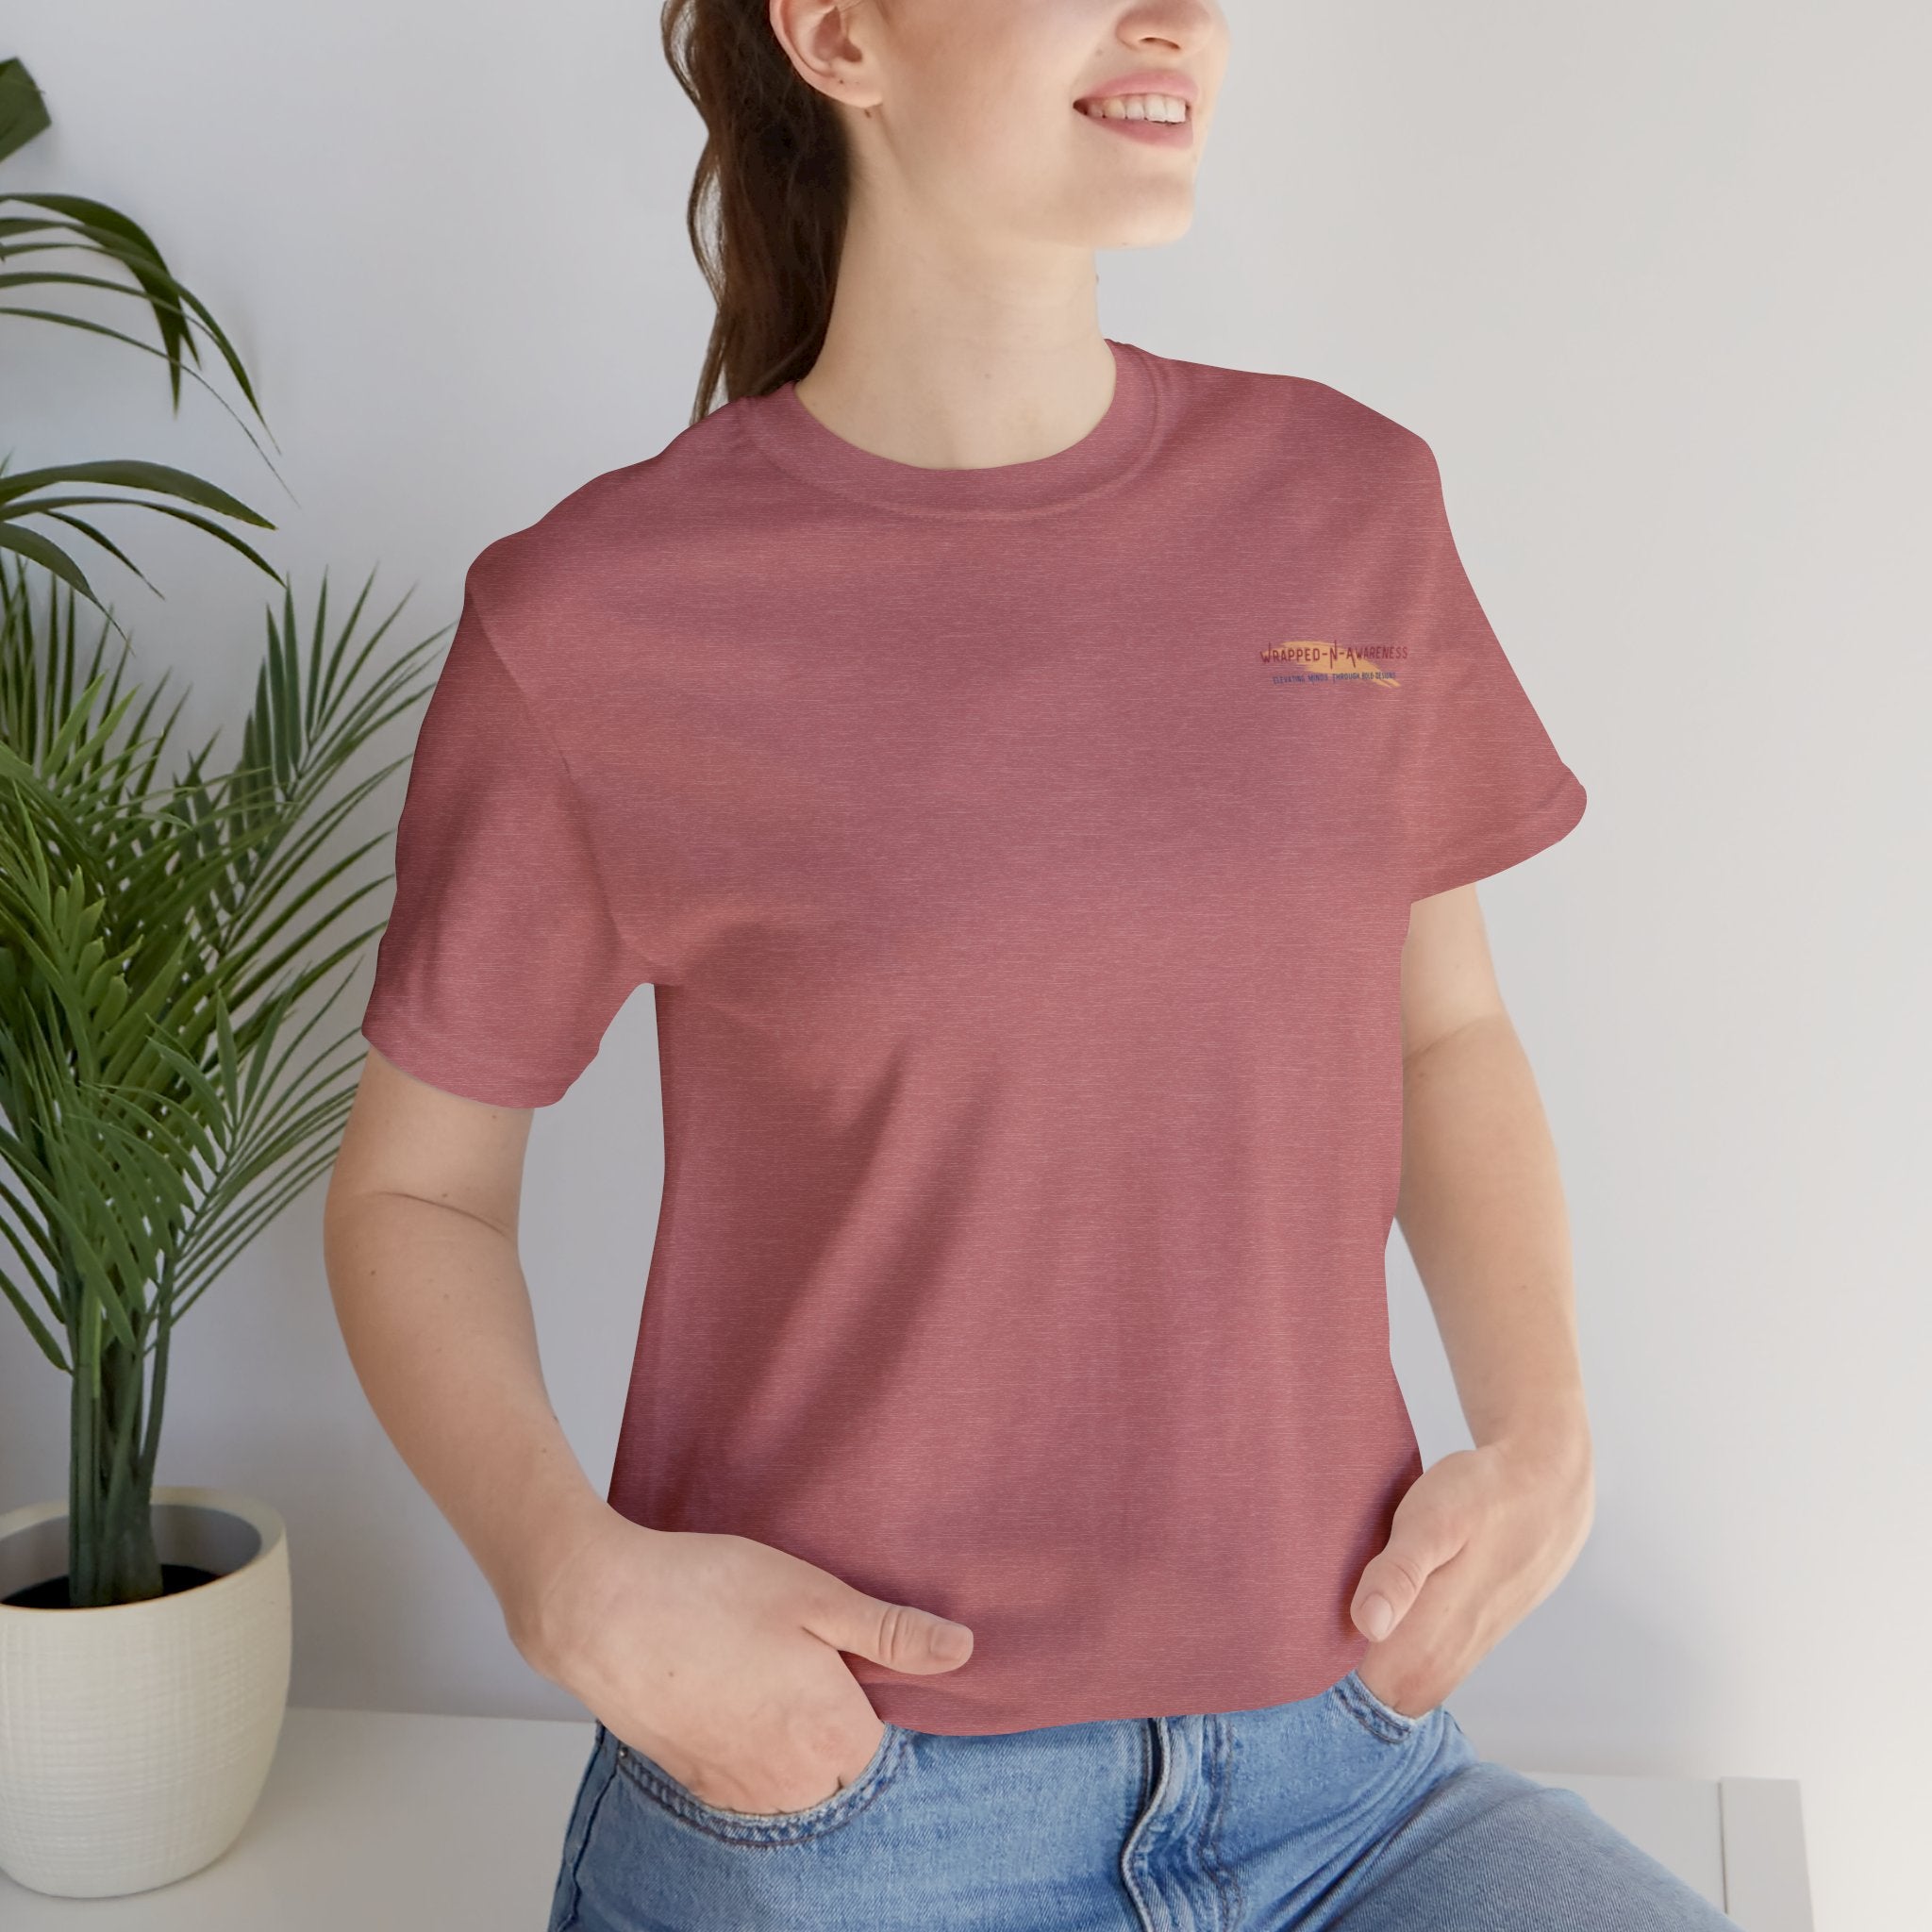 Mindfulness Heals Wounds Tee - Bella+Canvas 3001 Turquoise Airlume Cotton Bella+Canvas 3001 Crew Neckline Jersey Short Sleeve Lightweight Fabric Mental Health Support Retail Fit Tear-away Label Tee Unisex Tee T-Shirt 2904757970723418781_2048 Printify